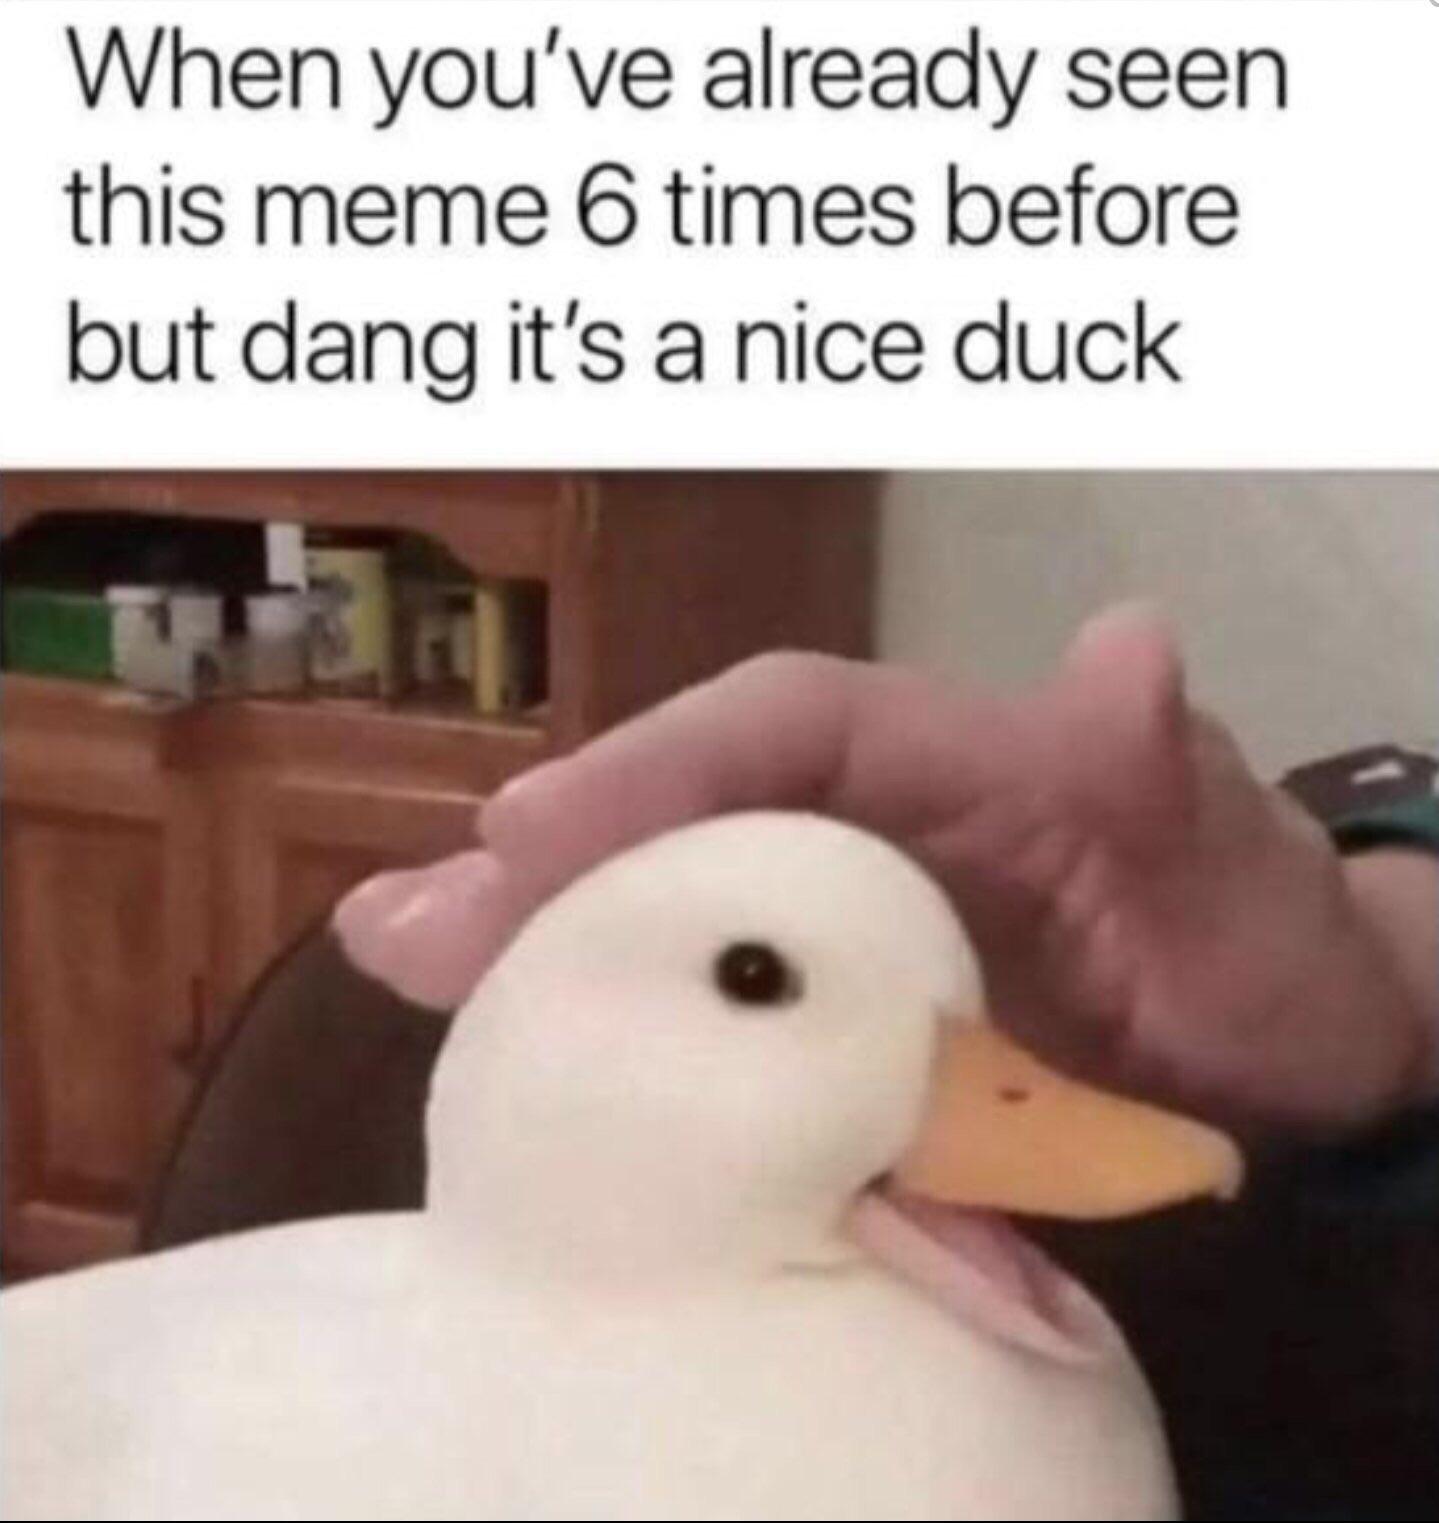 nice duck meme - When you've already seen this meme 6 times before but dang it's a nice duck